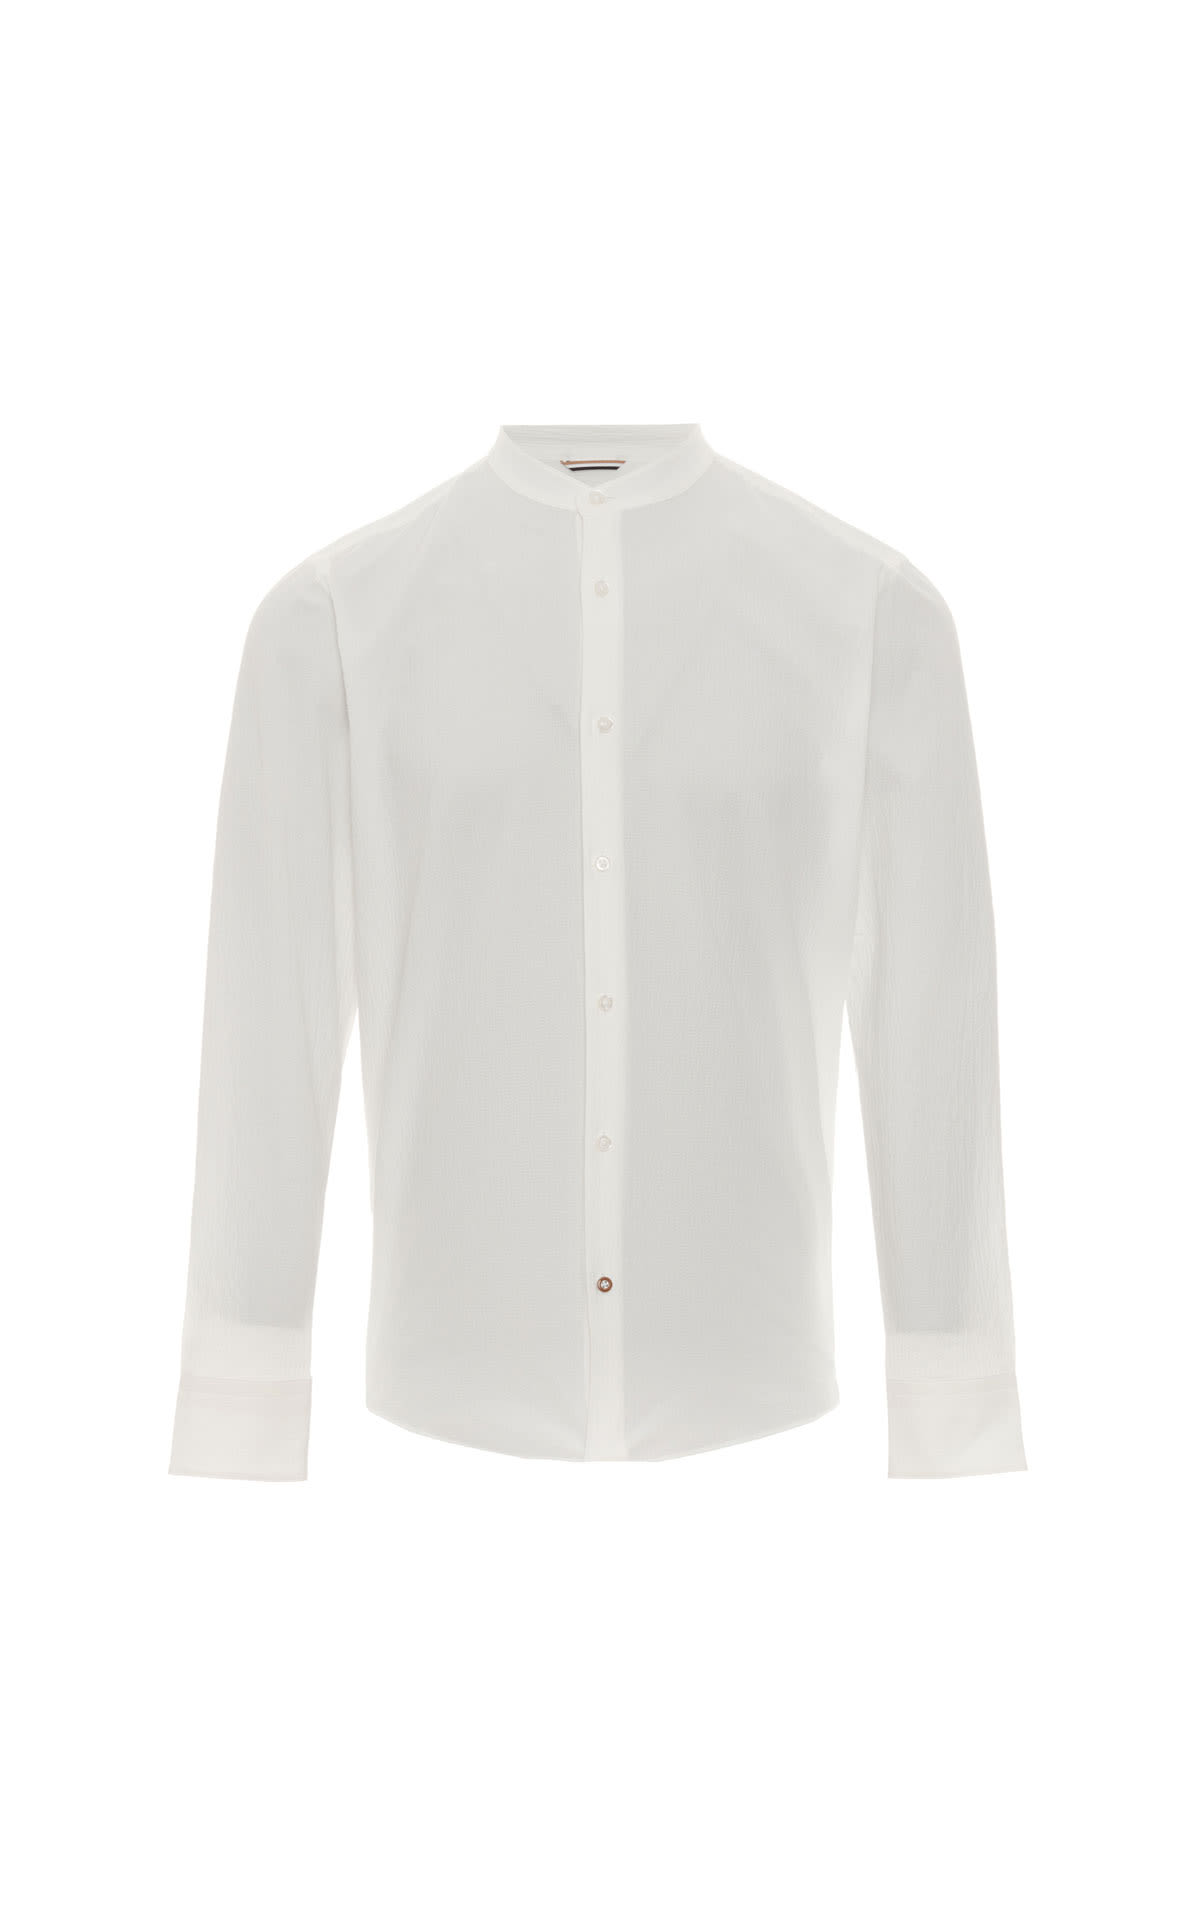 BOSS C-Hal shirt from Bicester Village